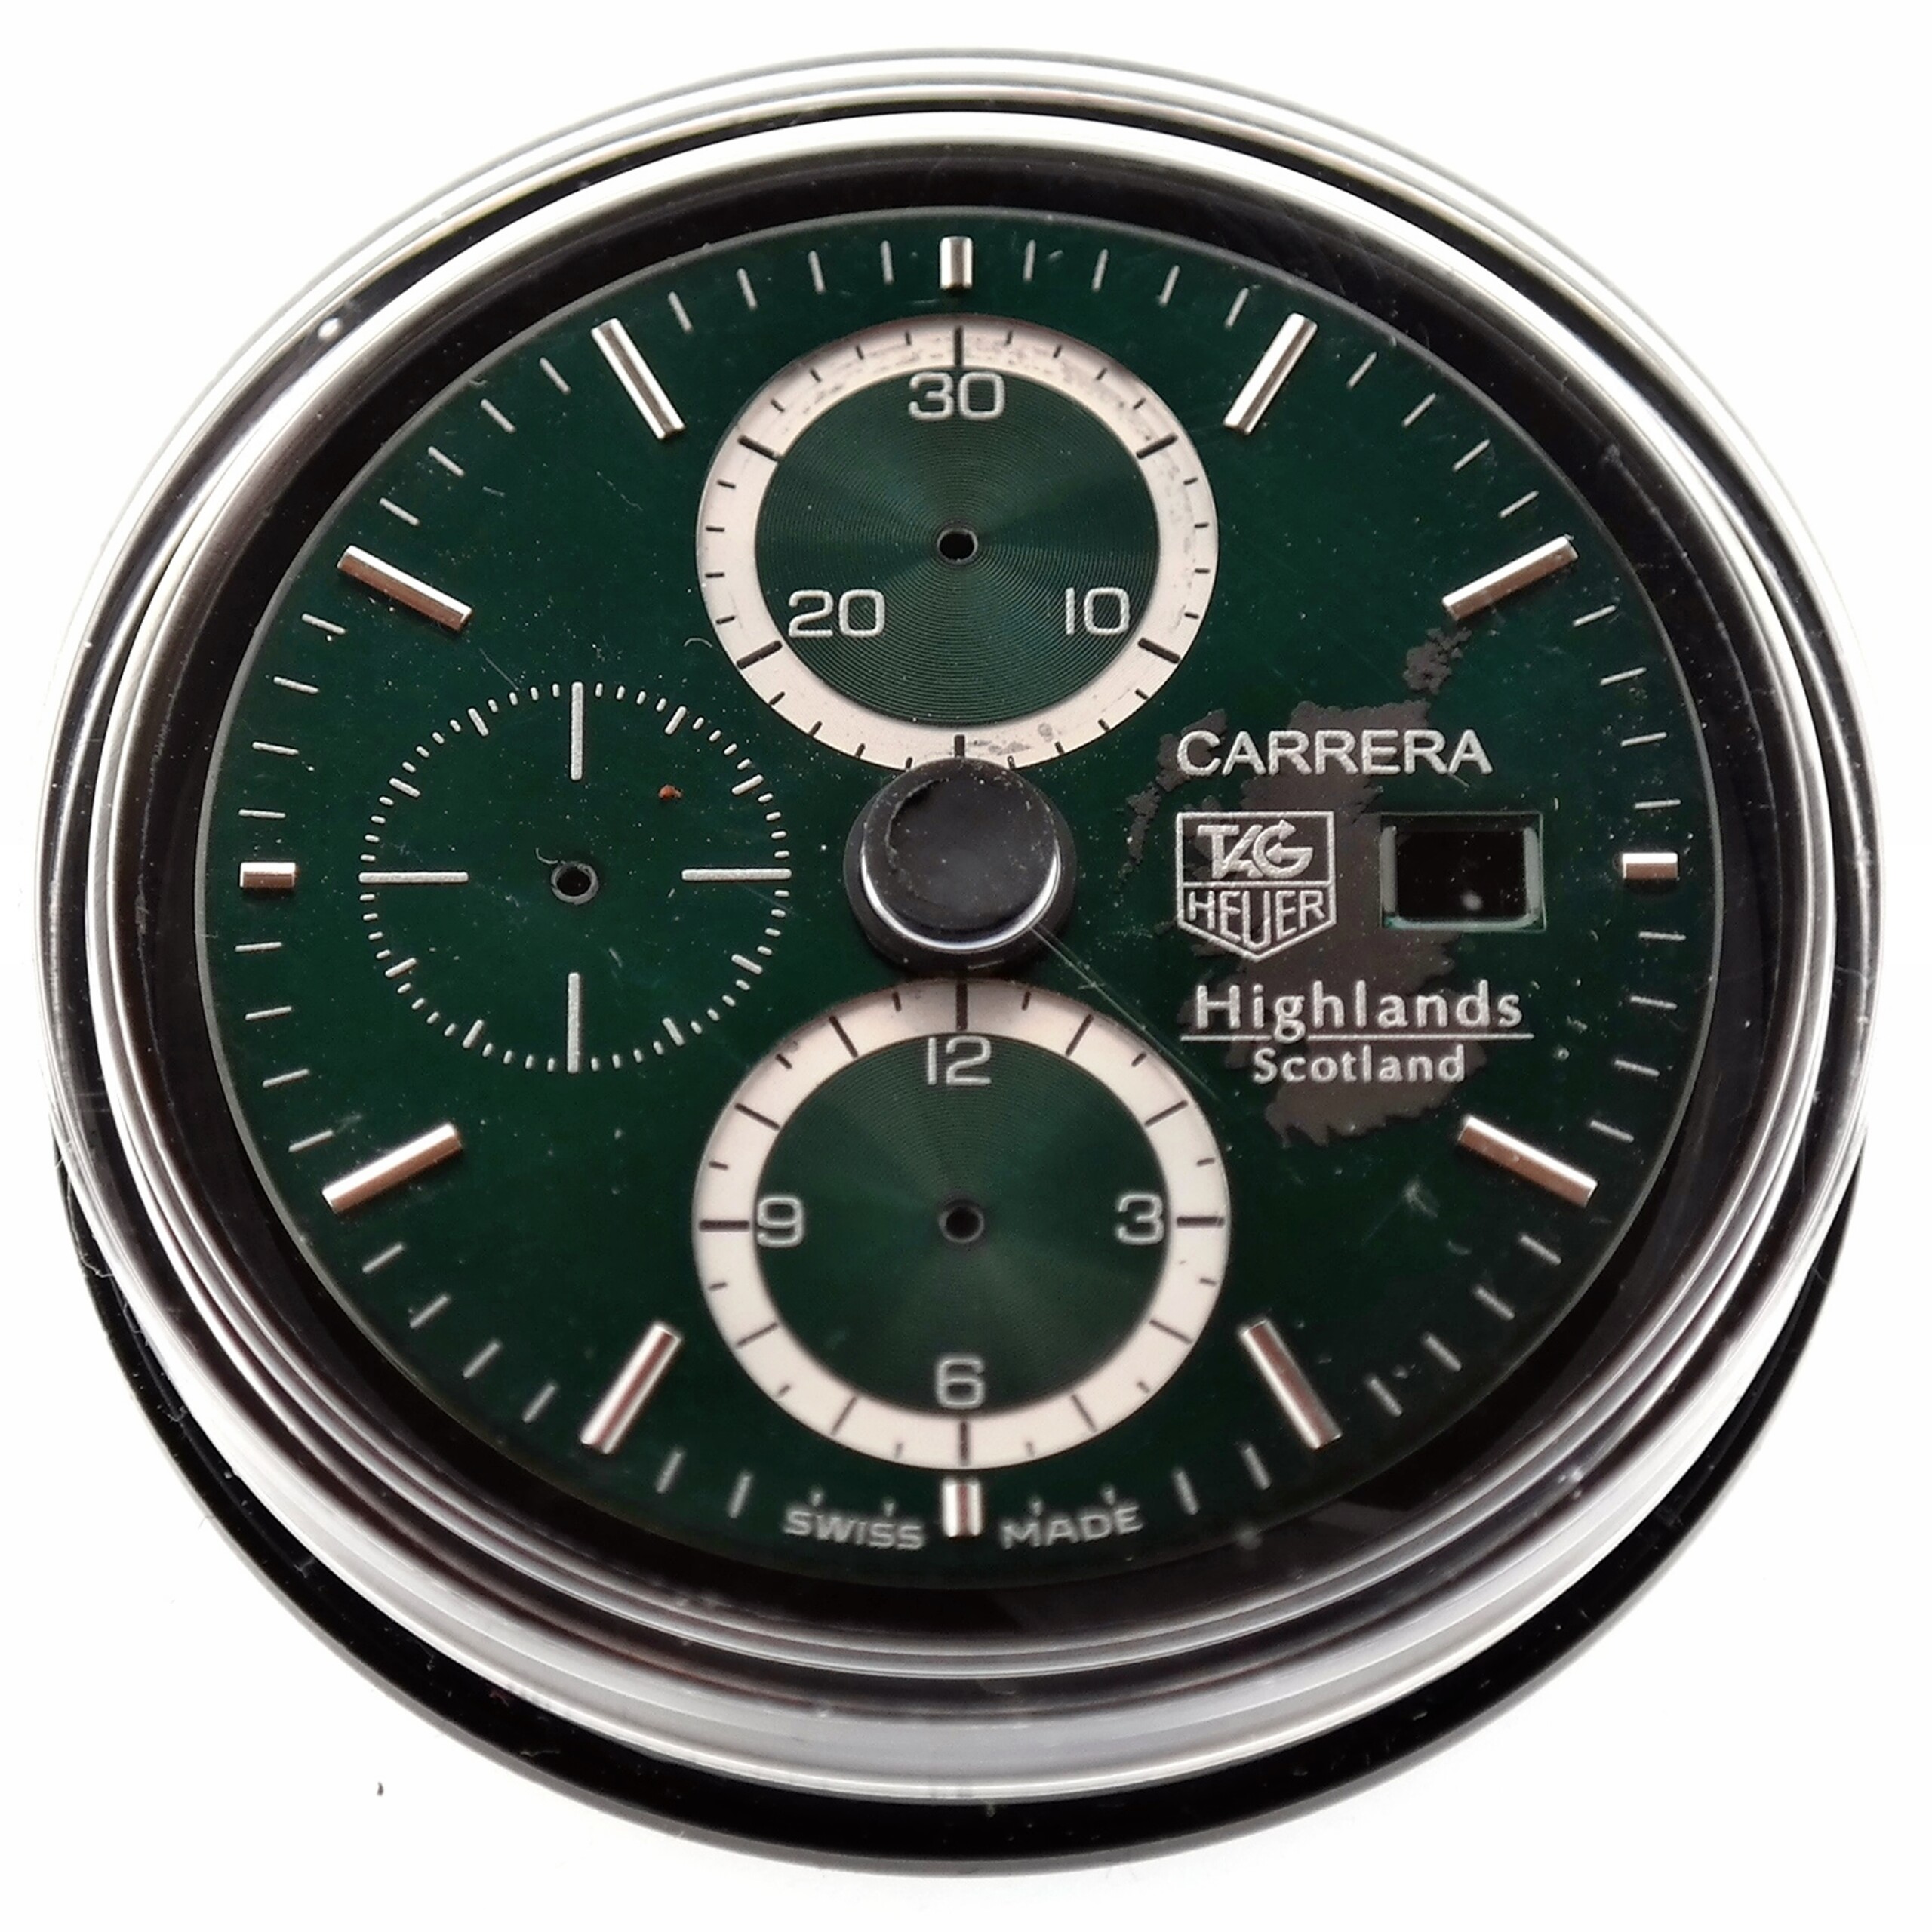 TAG Heuer Carrera Limited Edition "Scotland Highlands" CV2012 Watch Dial